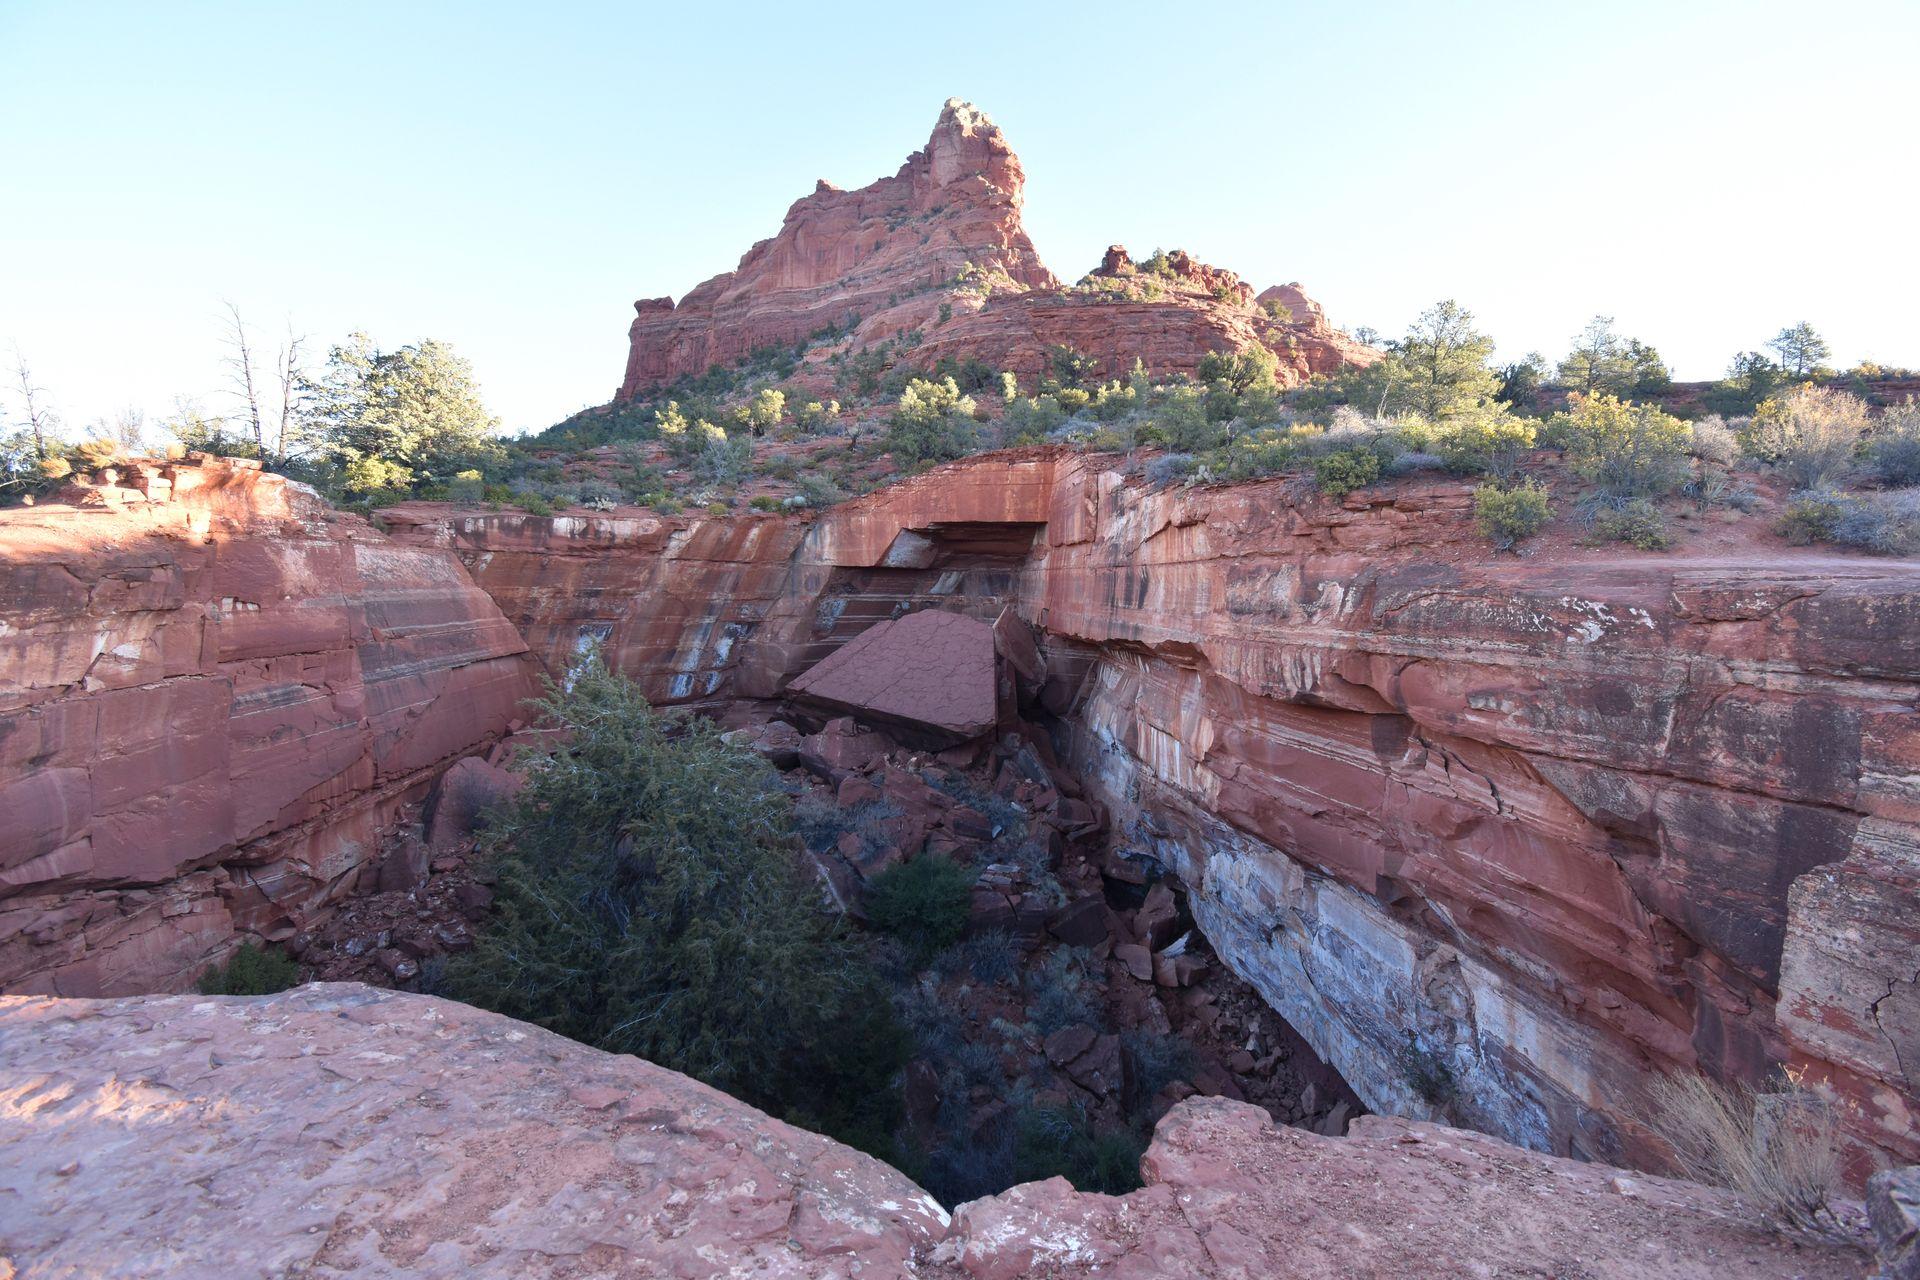 A giant hole surrounded by orange rocks. There are green trees at the bottom of the hole.